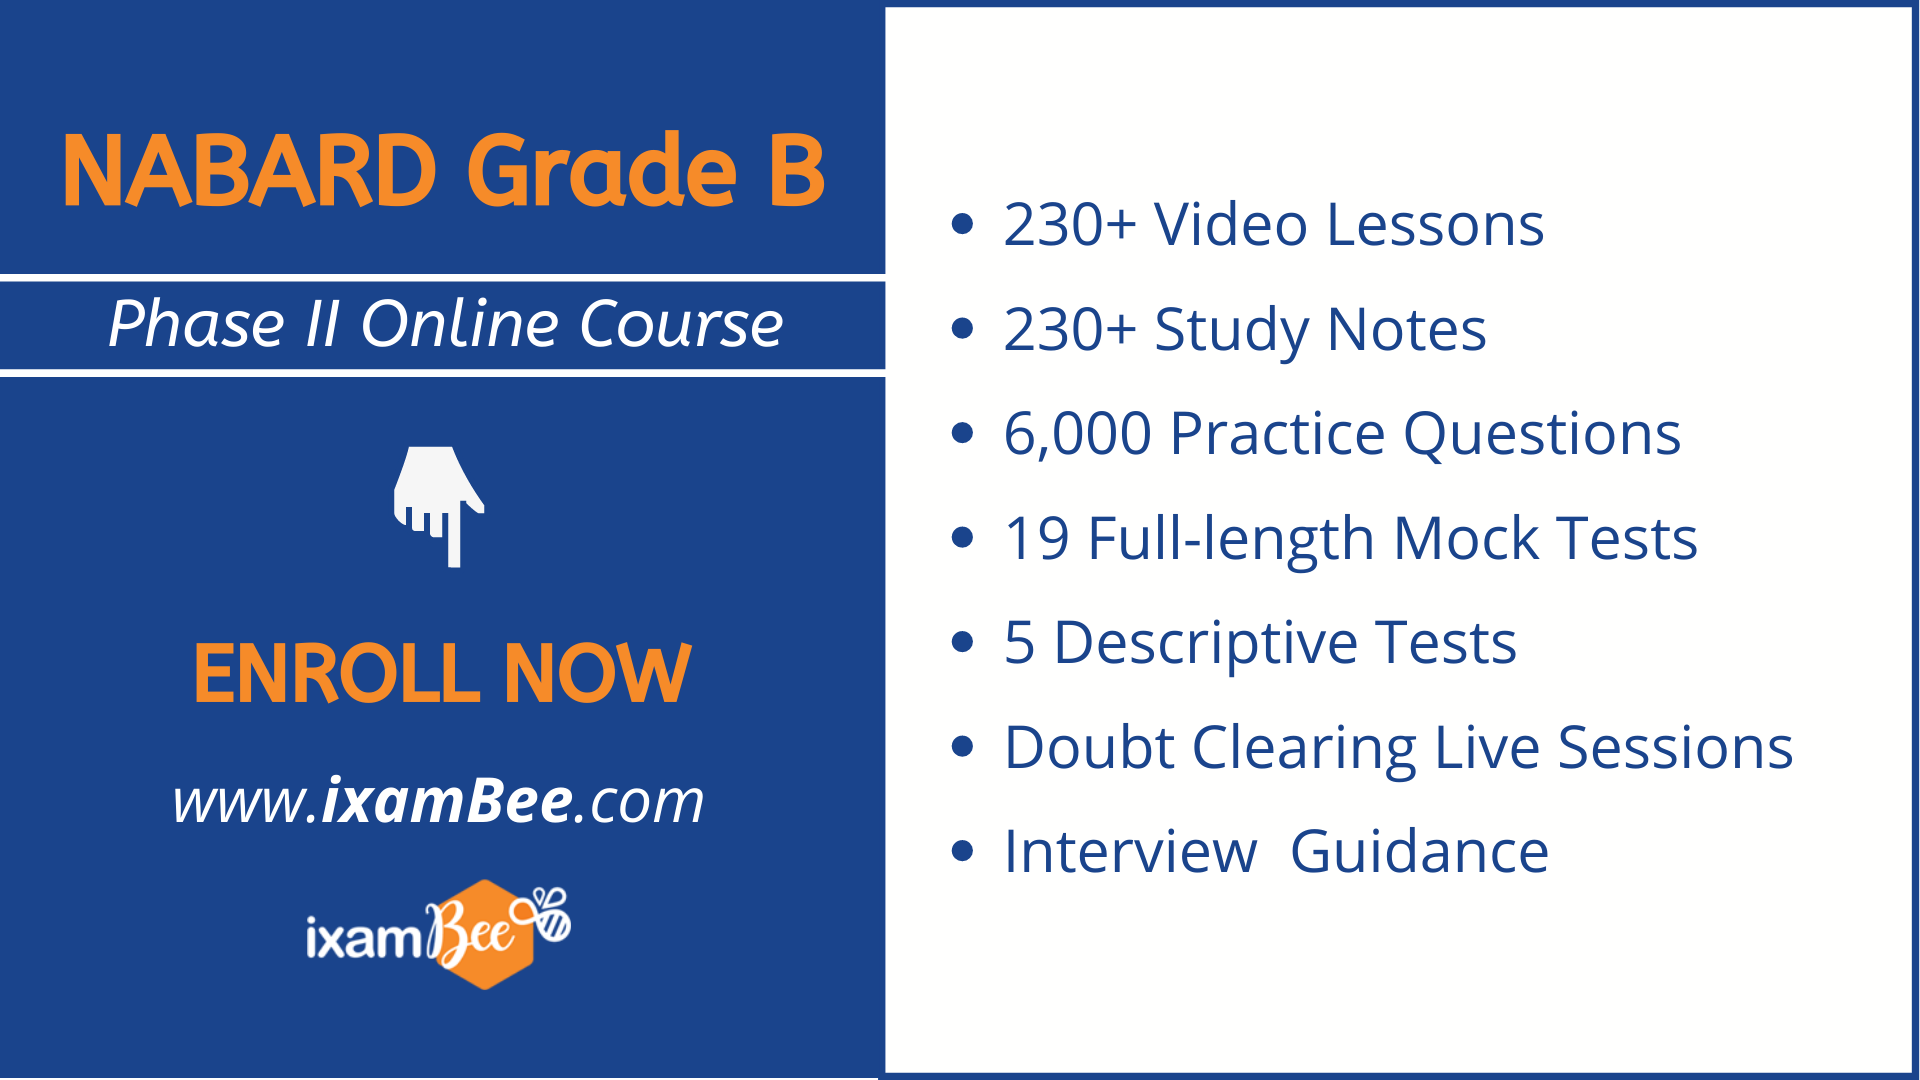  nabard grade b phase 2 online course